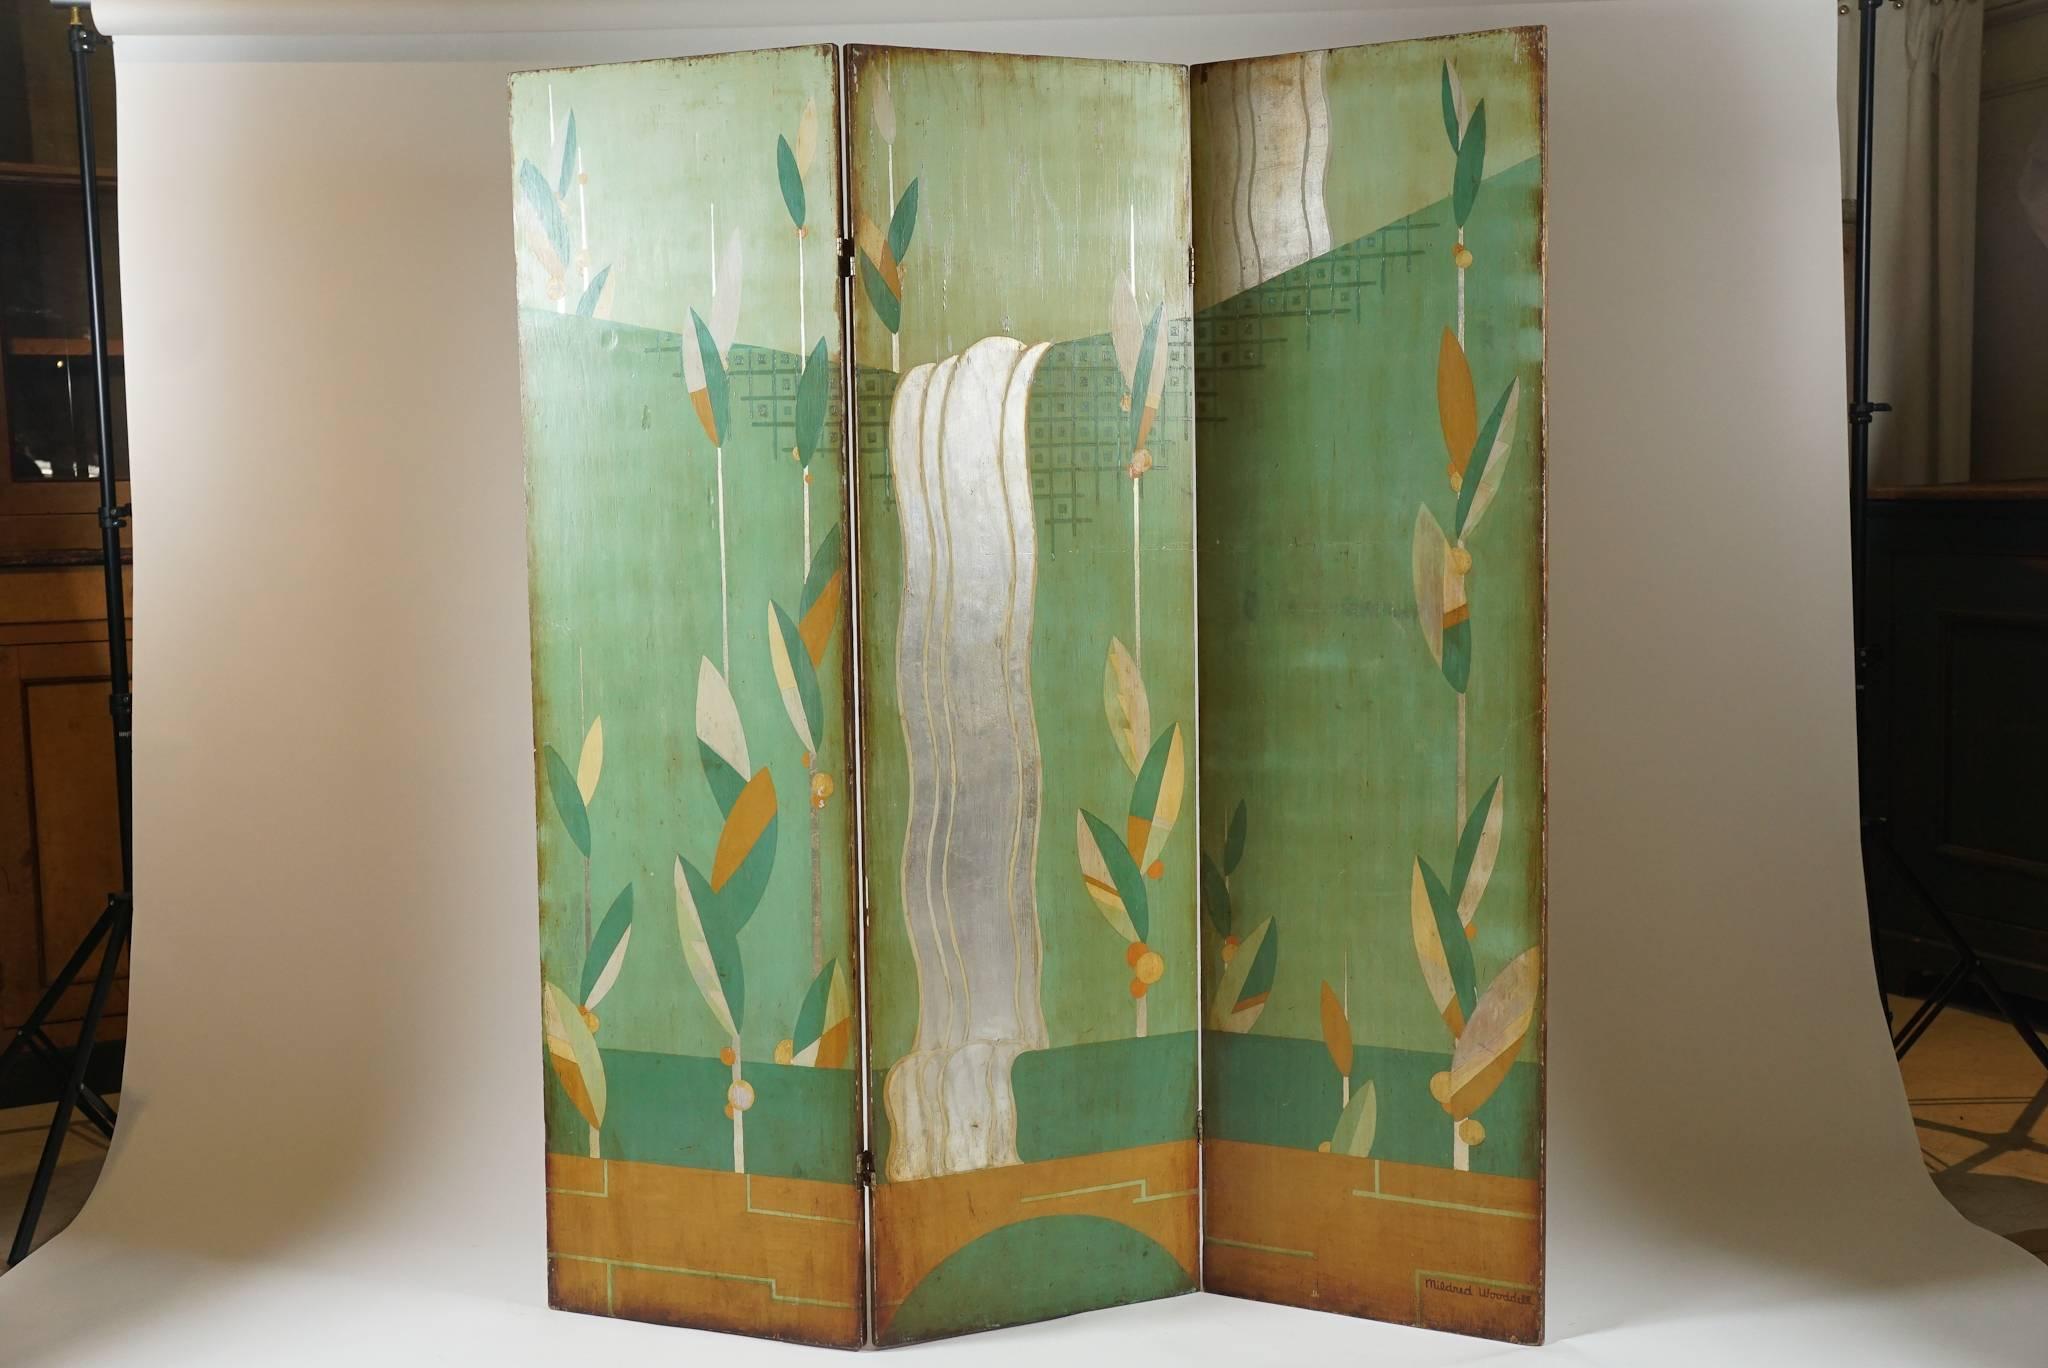 A beautiful and naively created three-part screen with bold Art Deco styling it is painted on solid boards by artist Mildred Woodell during the 1920s.